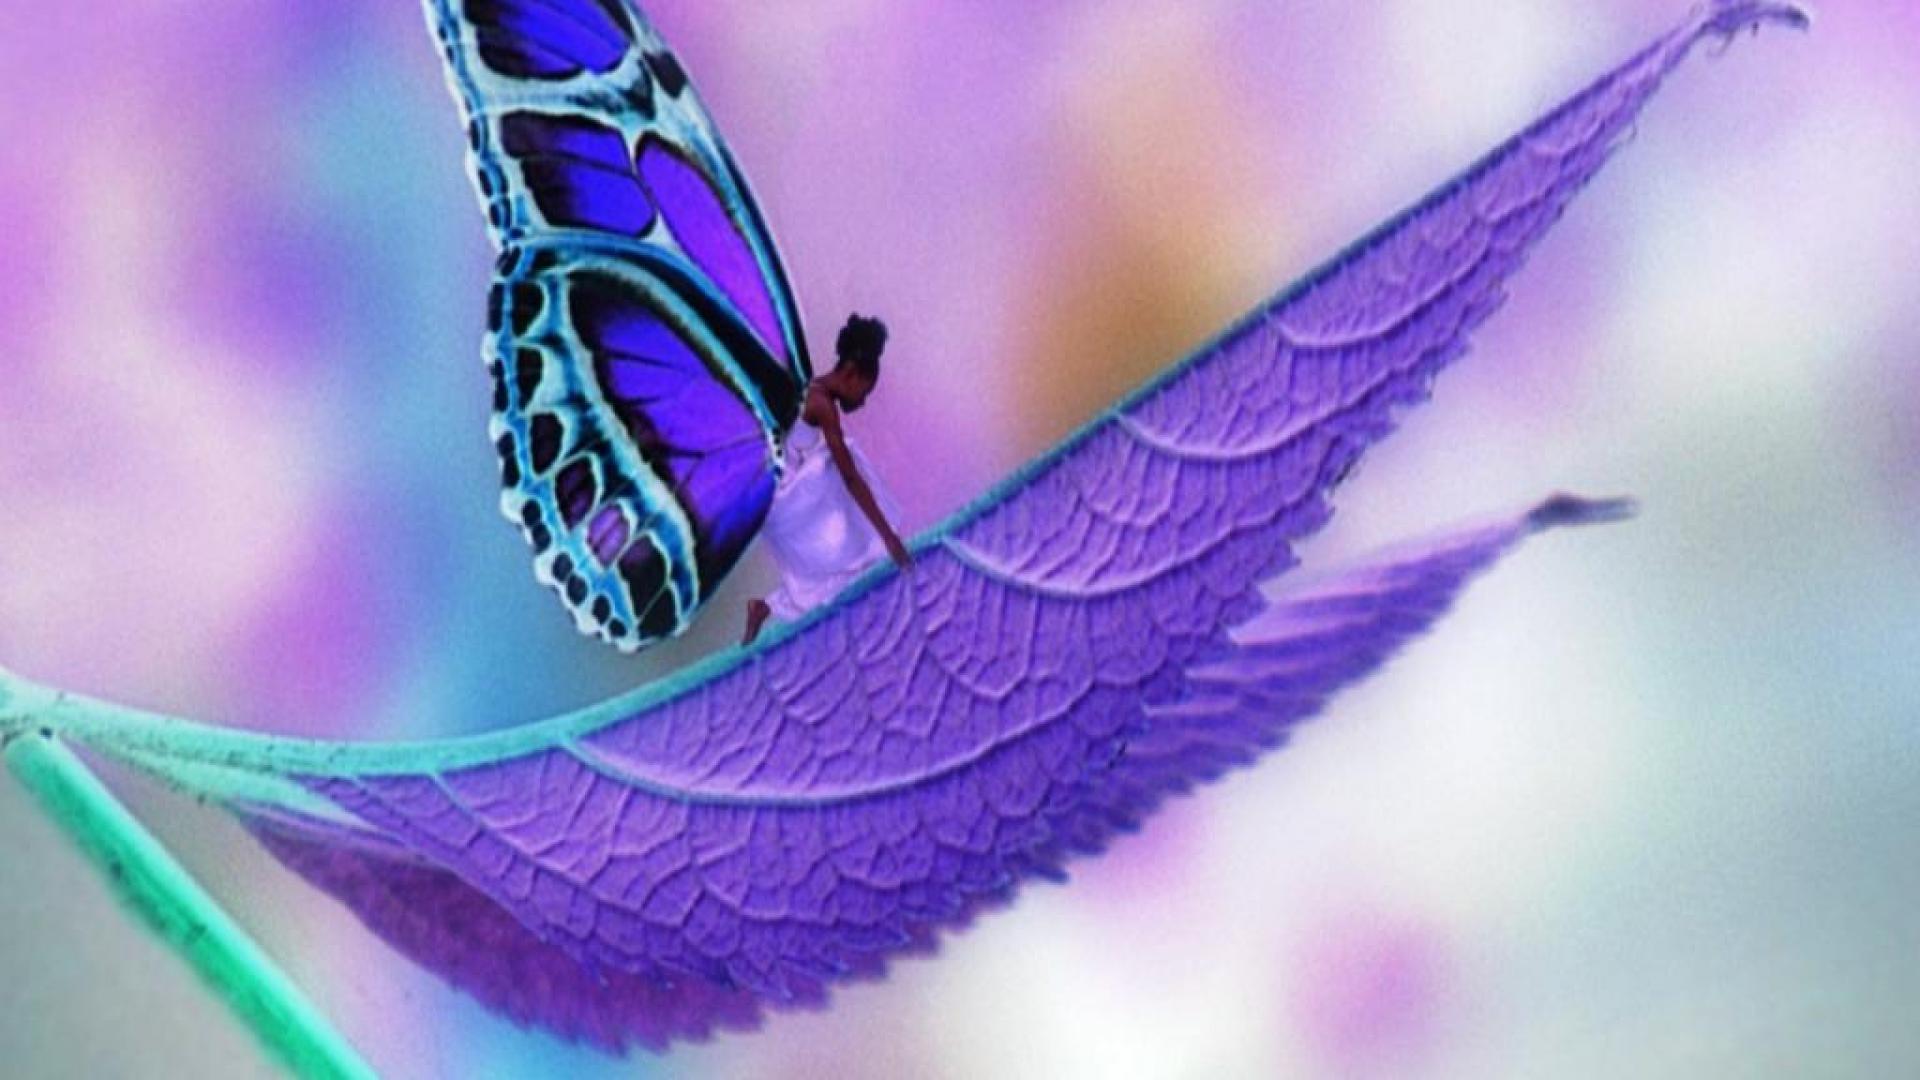 cute butterfly wallpaper,purple,blue,butterfly,violet,insect